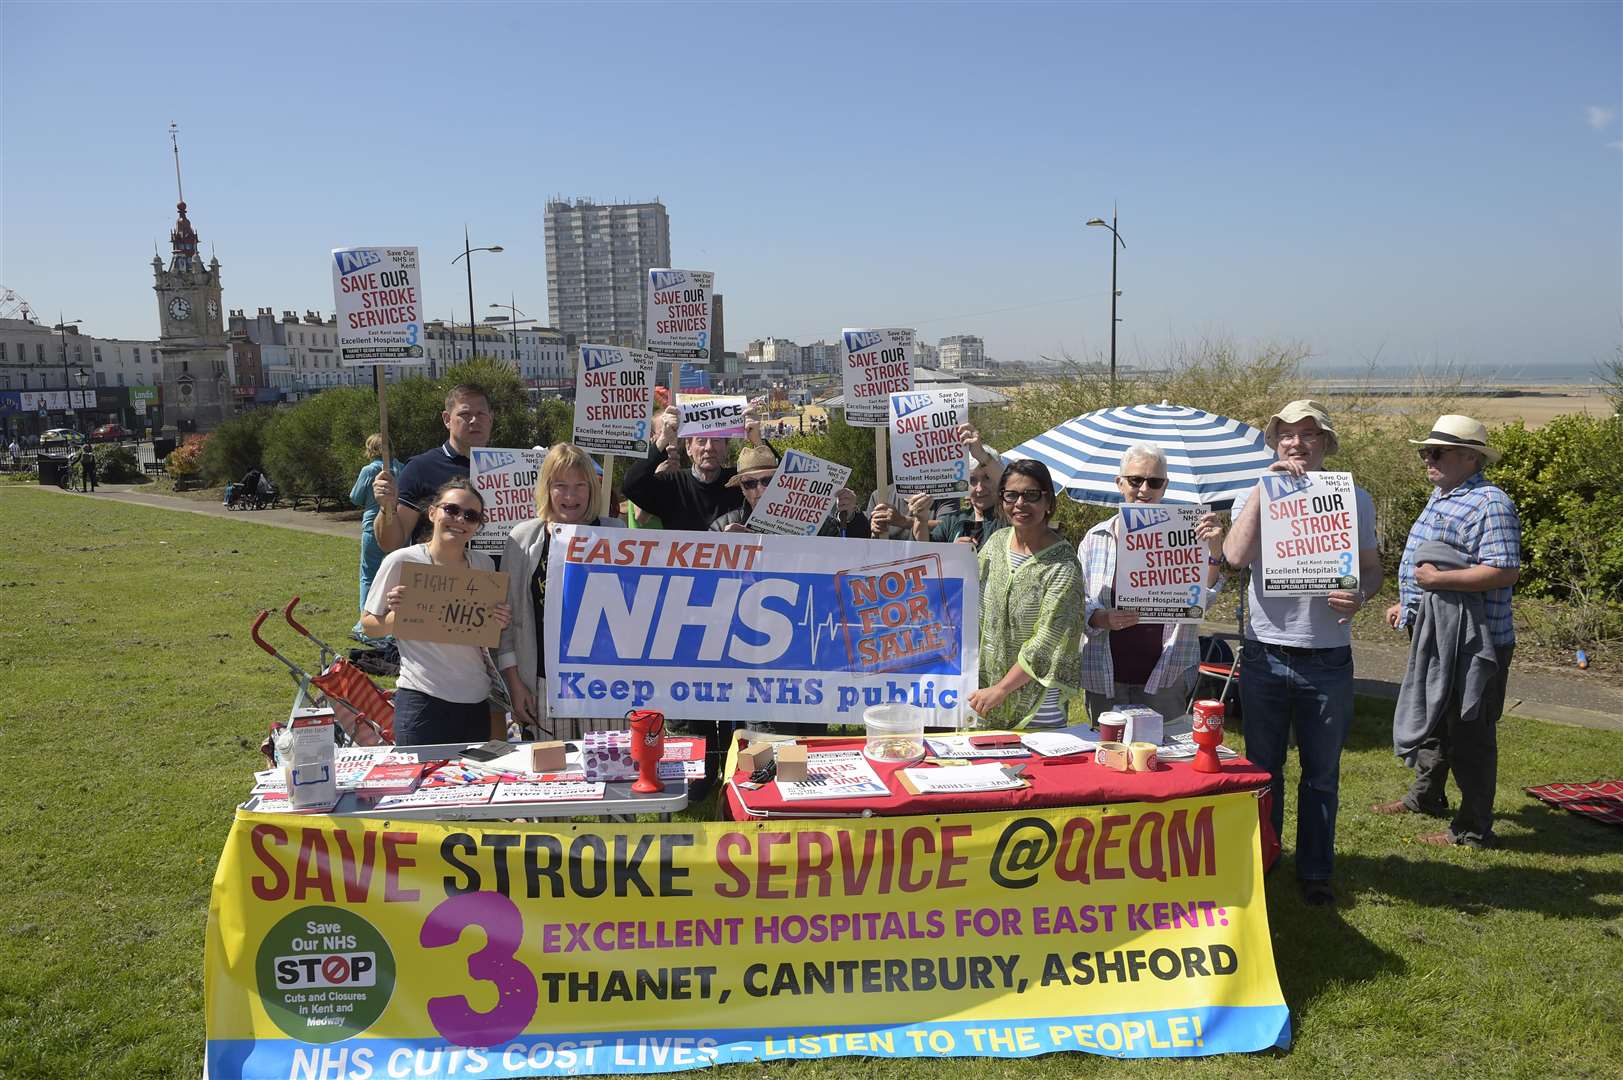 Save Our NHS in Kent has been campaigning regularly in Thanet to improve health services